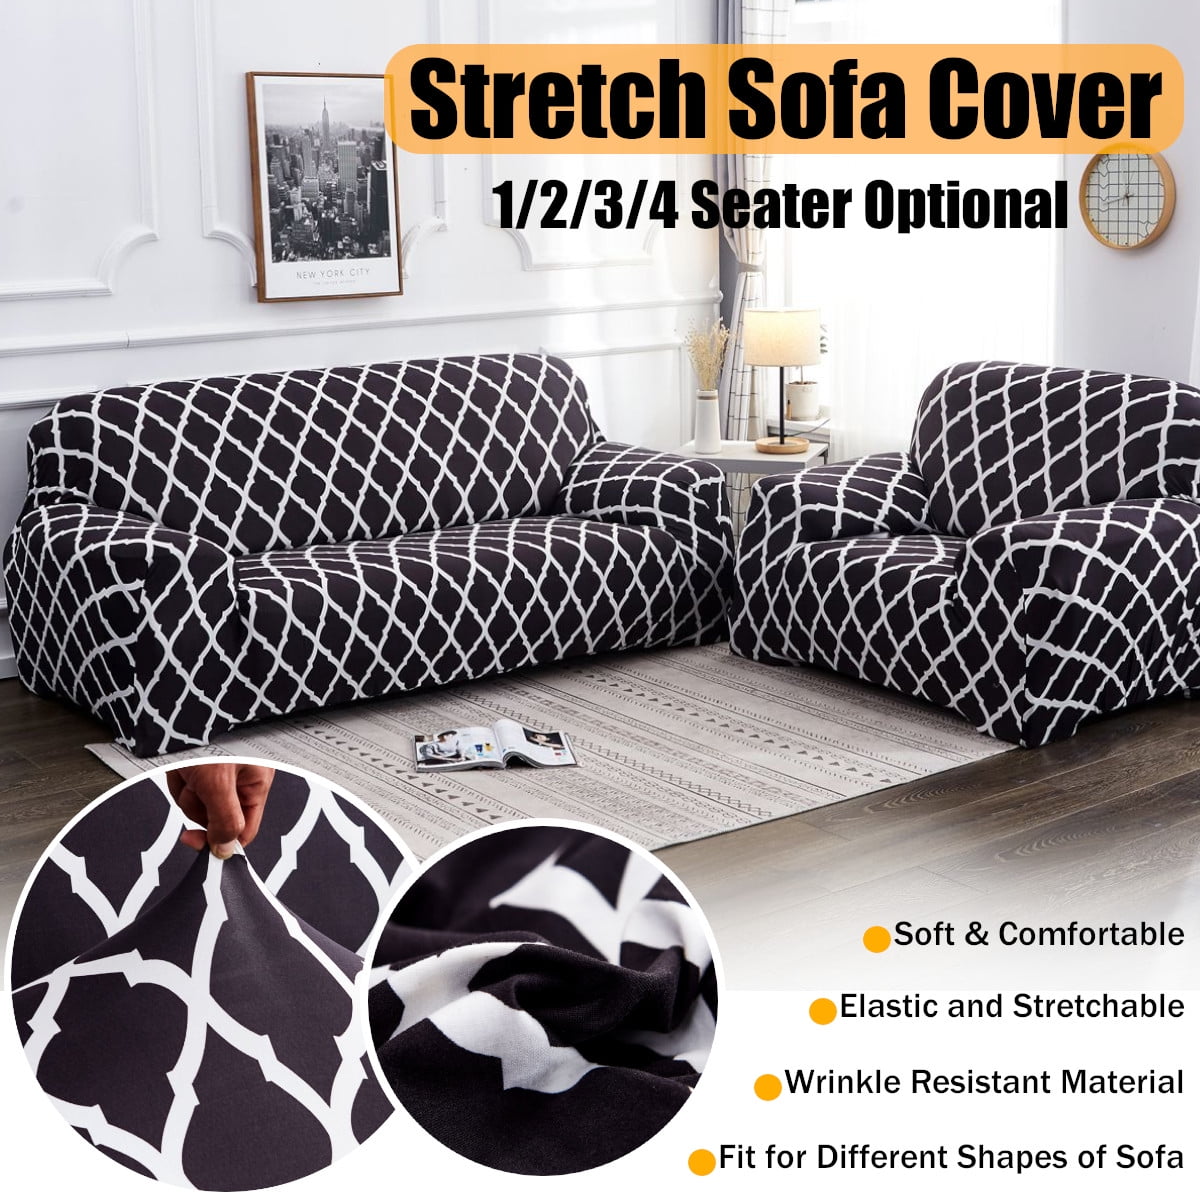 New 1/2/3/4 Seats Cushion Cover Stretchy Slipcovers Protector Sofa Seat Fashion 